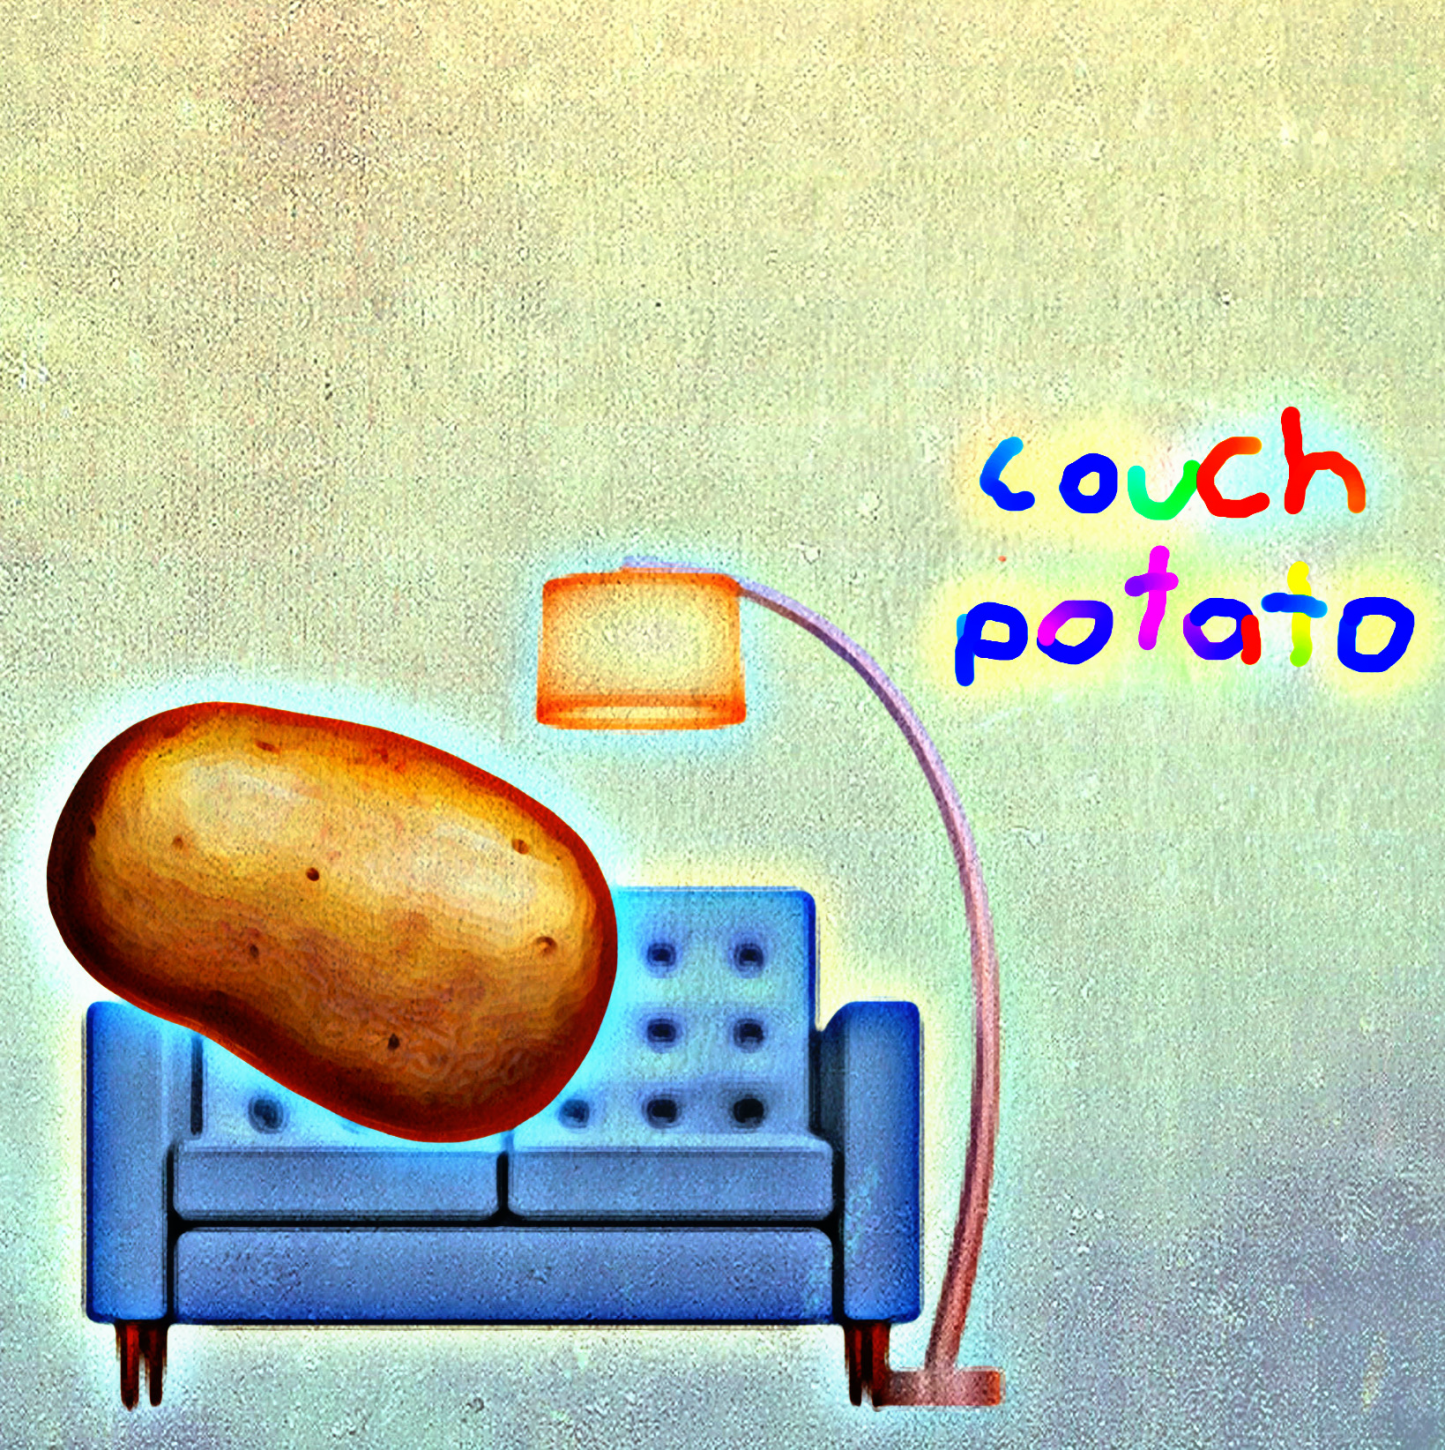 Alex Echo - 'Couch Potato' -  Framed Limited Edition